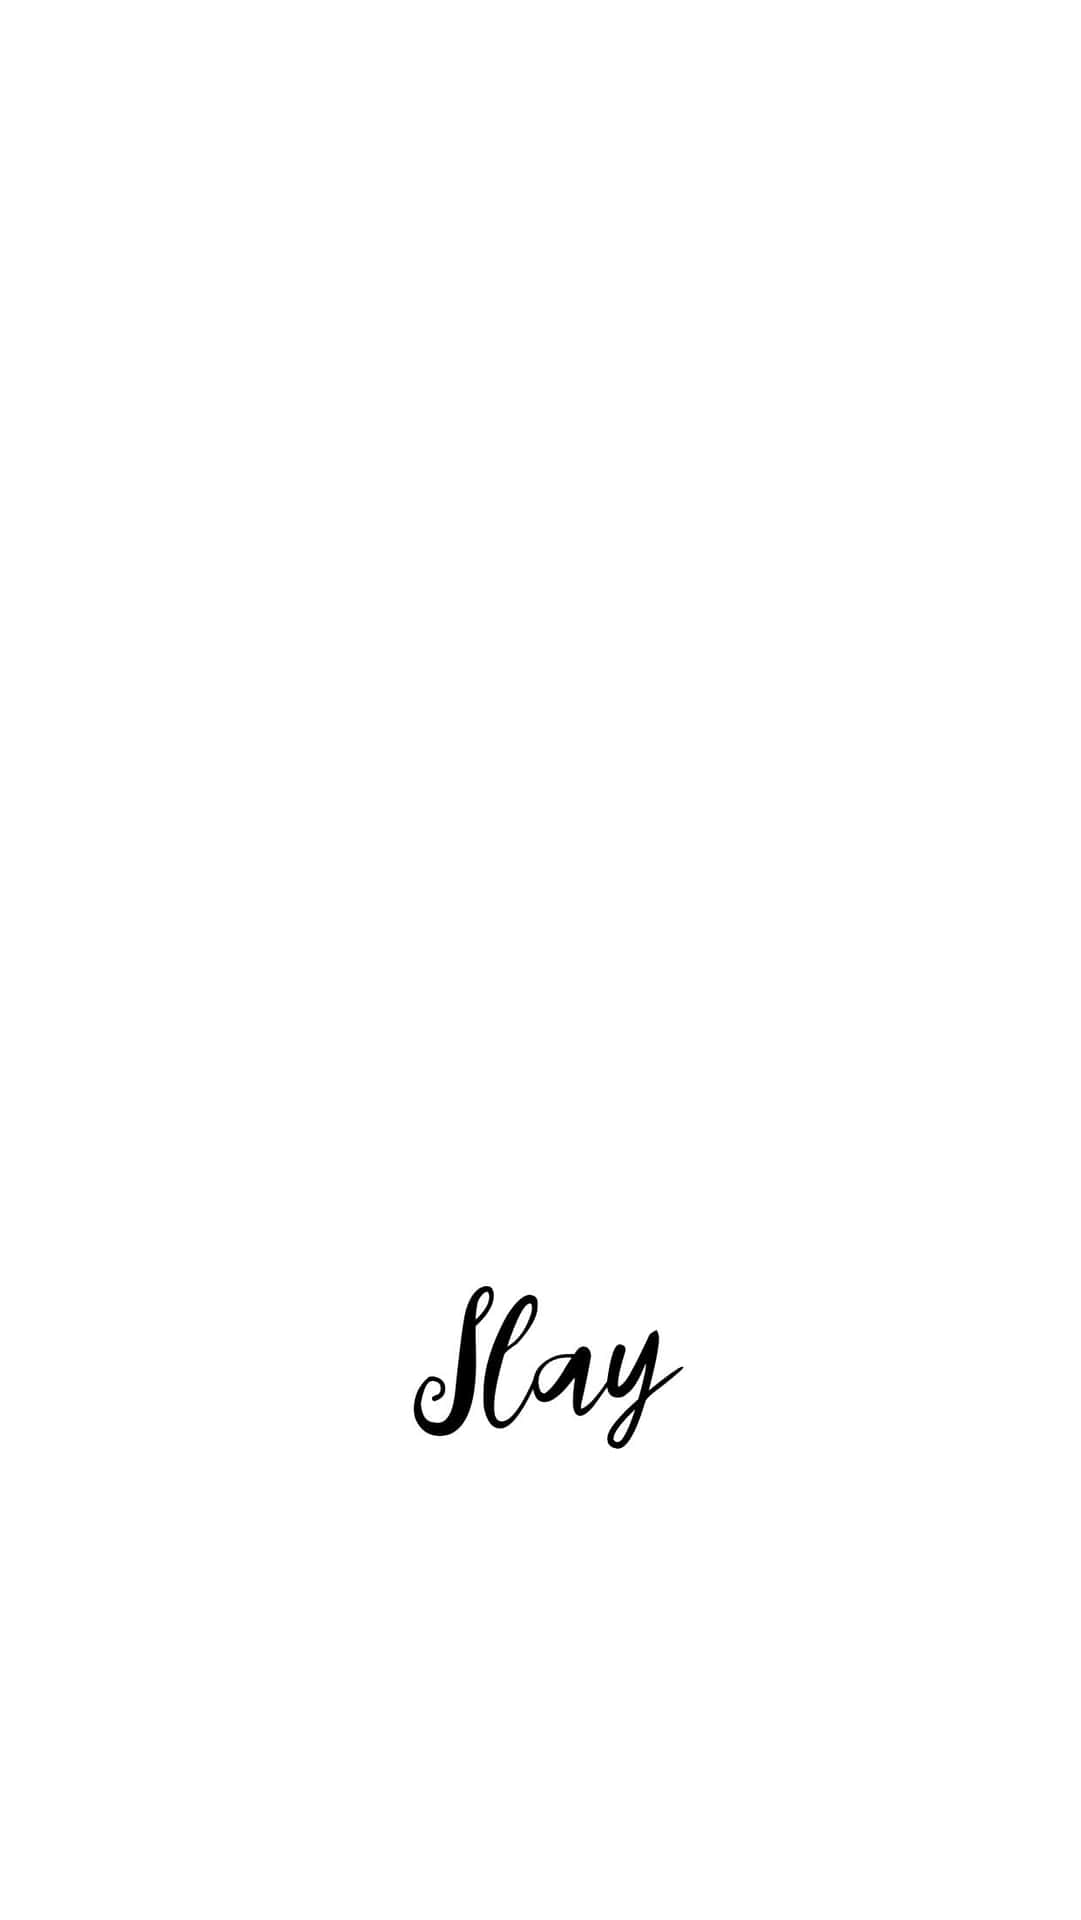 Download Slay Word Soft White Aesthetic Wallpaper | Wallpapers.com